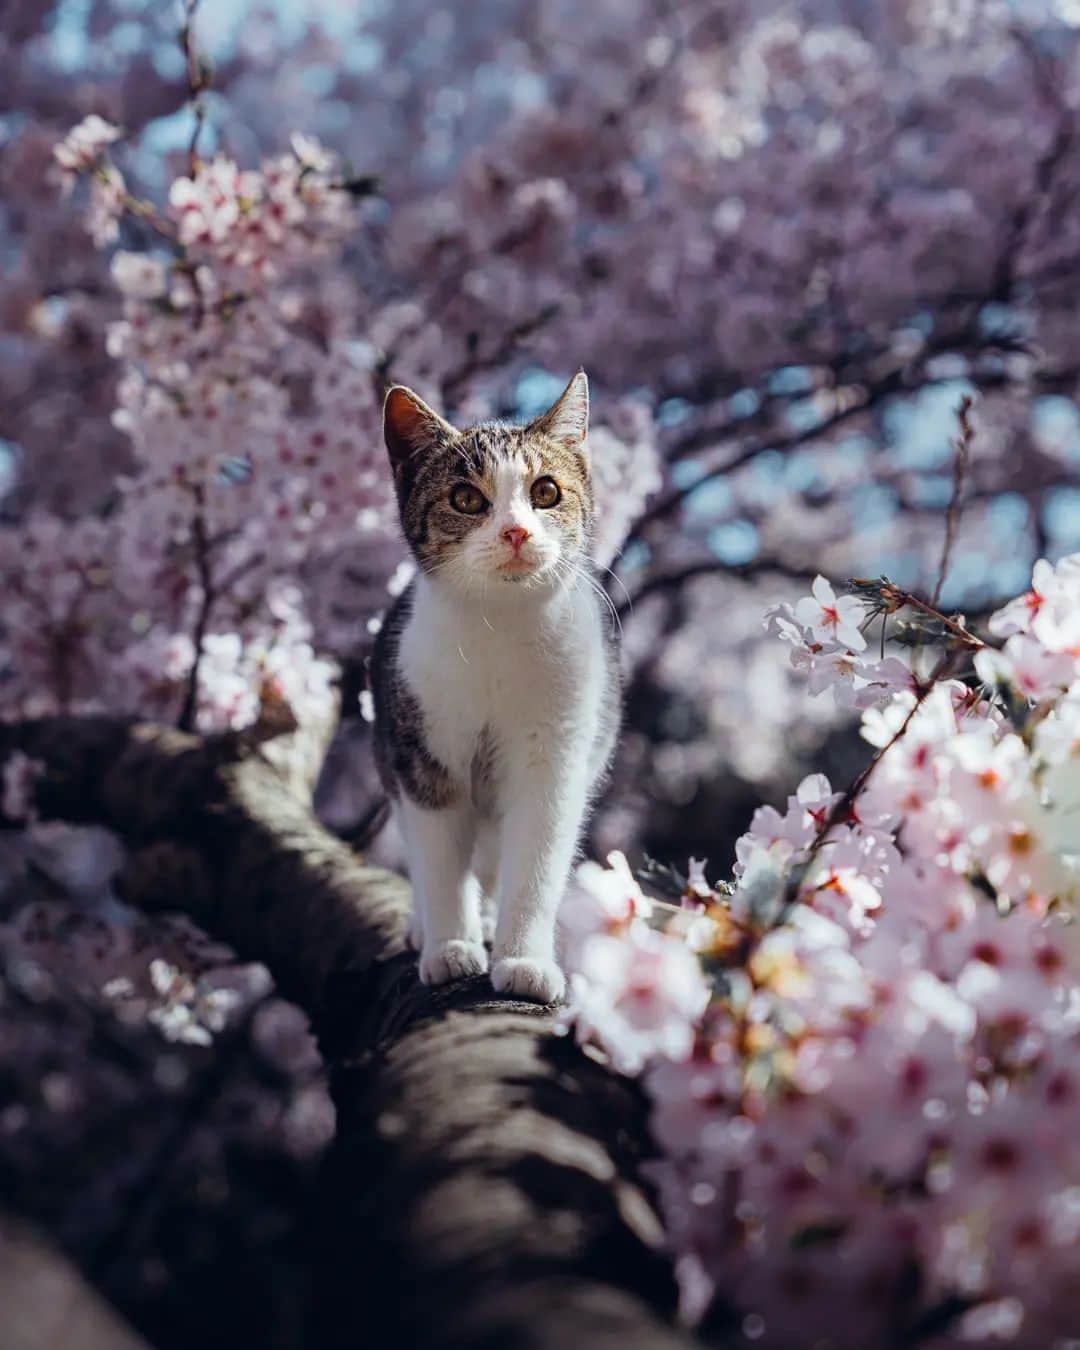 deepskyのインスタグラム：「Hanami Cat  . . Sakura season is coming soon !!  Last year, I bumped into a beautiful cat in a park . It was adorable and friendly to me. I captured itstrolling in a sakura tree, enjoying the full-bloomed cheery blossoms.  . . もう少しで桜の季節ですね！今年は少し早いように感じます。毎年この季節はいろんな地域に桜を追っかけに行きます。昨年は公園でキレイな猫に出会いました。とても写真として気に入ってます。 . #sakura #spring #cherryblossom #photography  #桜 #春 #cat #猫 #lonelyplanet #voyaged #hypebeast  #complexphotos  #sonyalpha  #travel #beautifuldestinations」